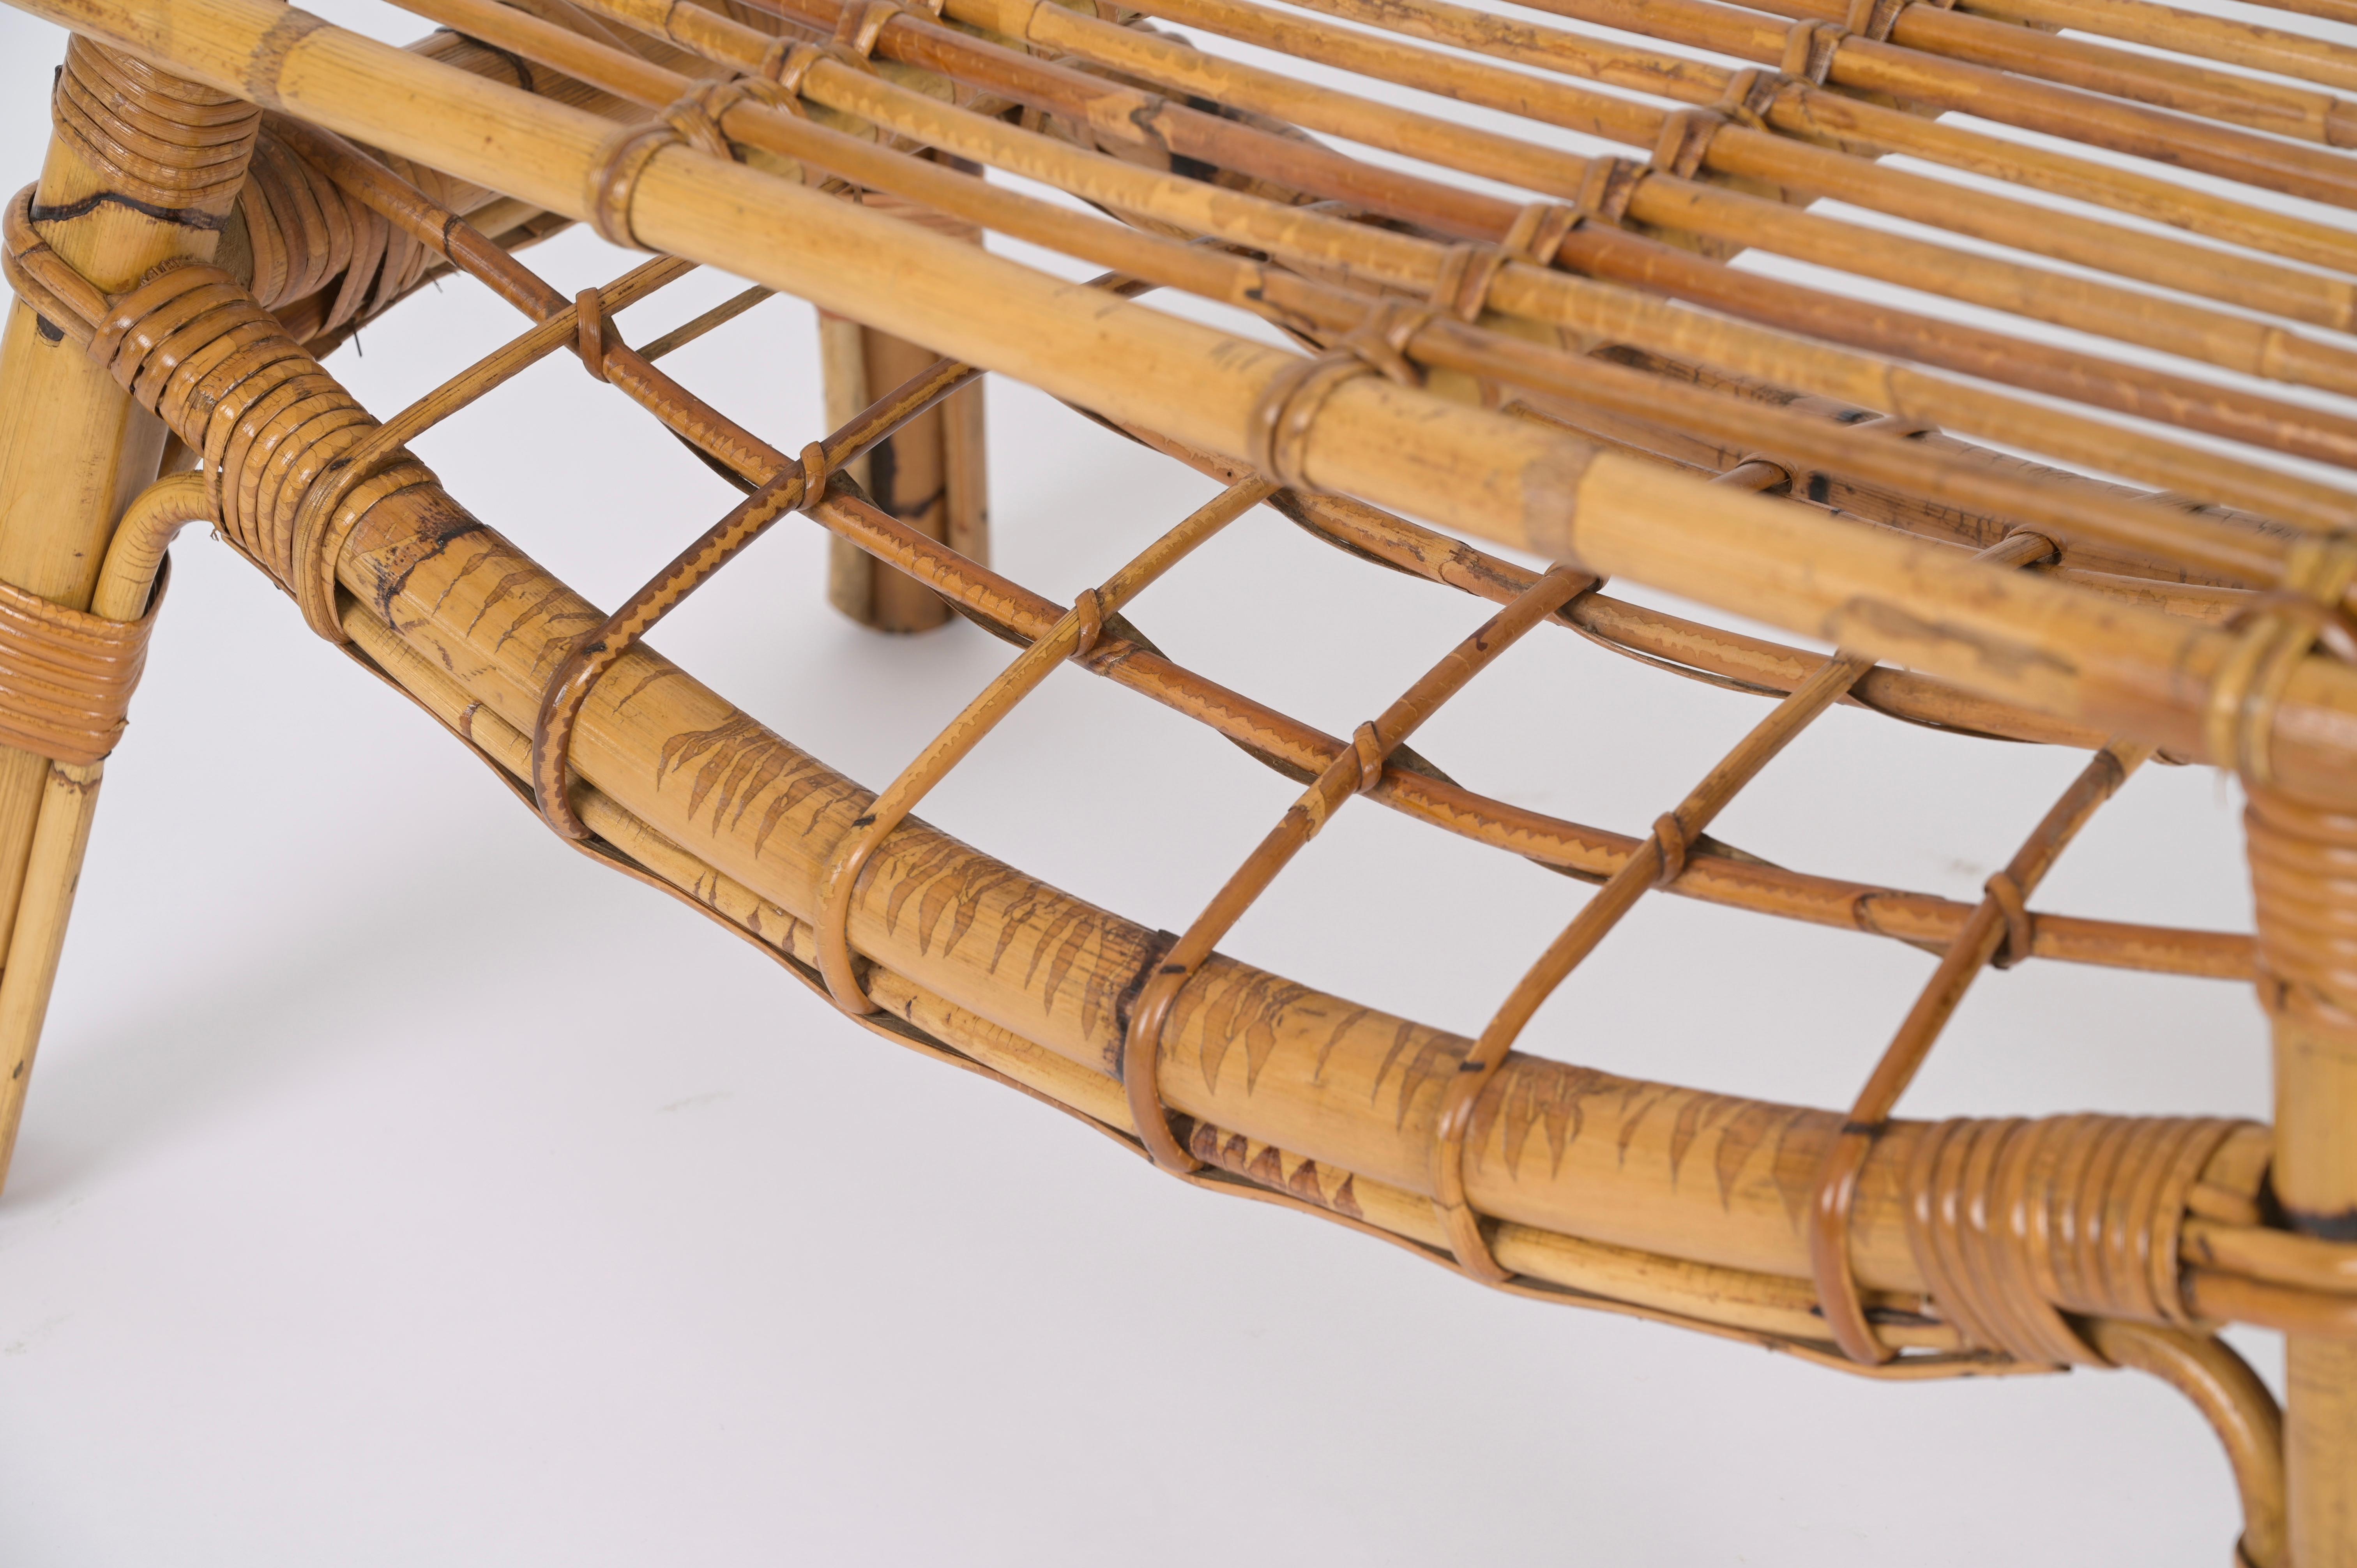 Mid-20th Century Italian Coffee Table or Bench in Rattan and Wicker by Tito Agnoli, 1960s For Sale